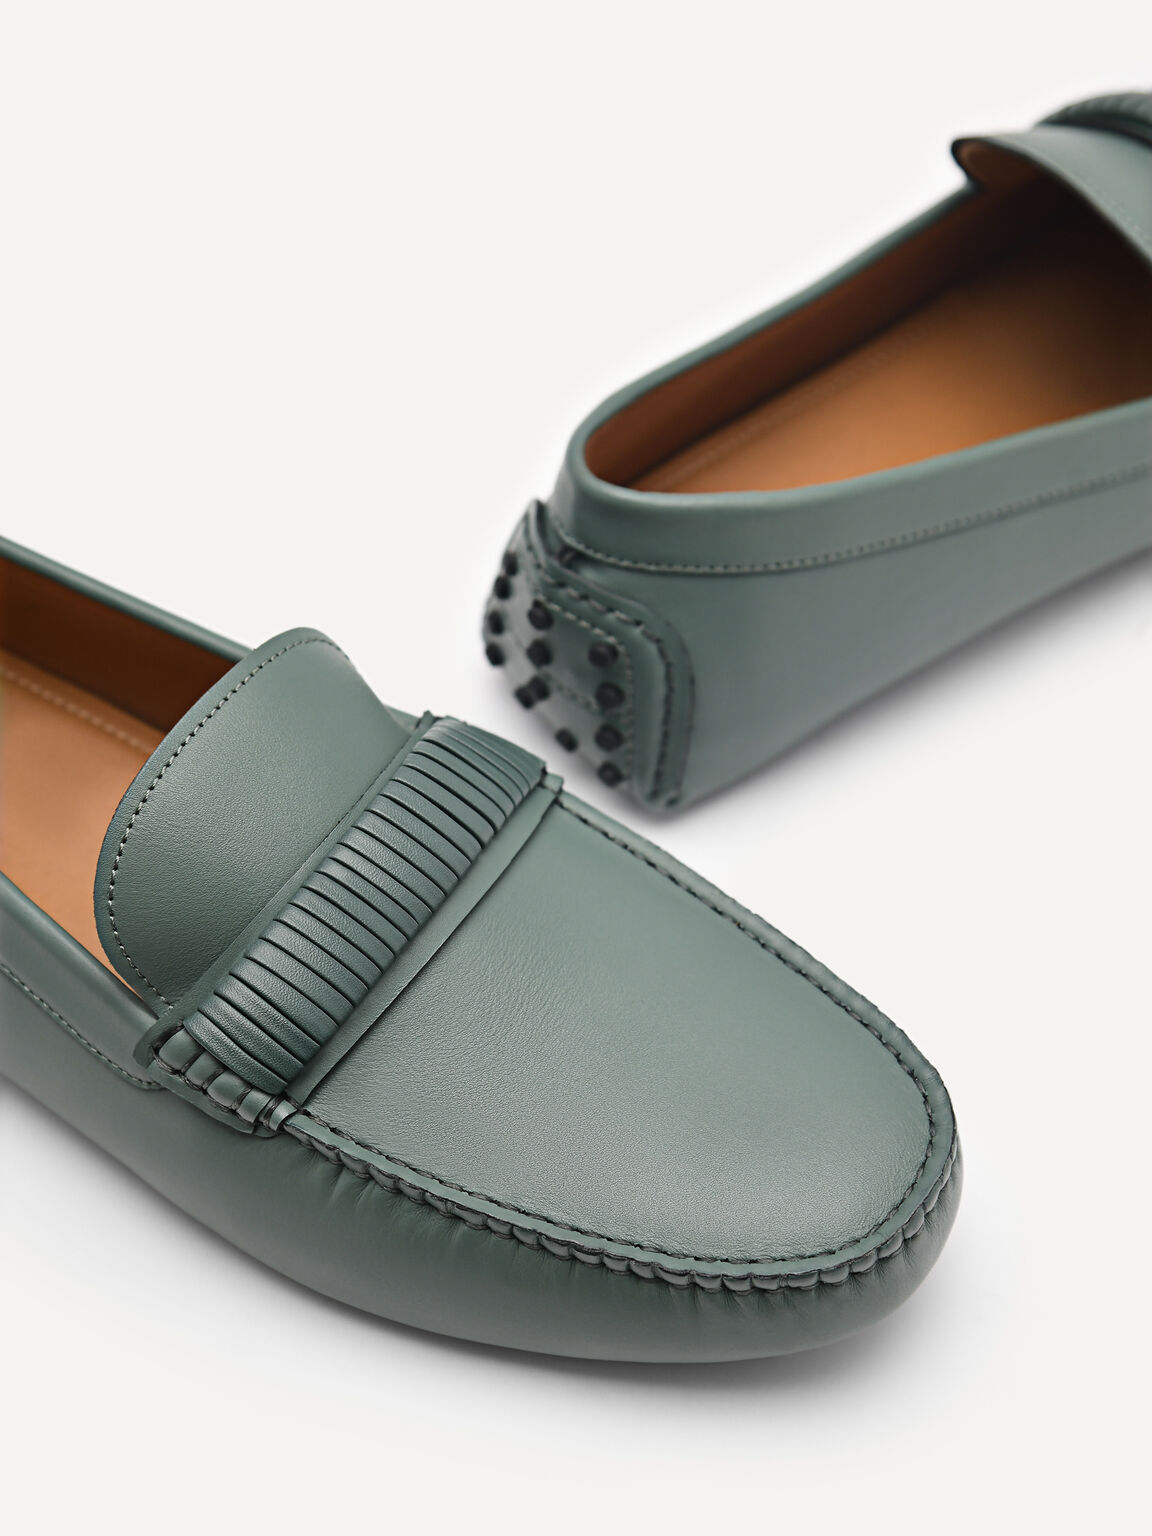 Kent Leather Driving Shoes, Green, hi-res